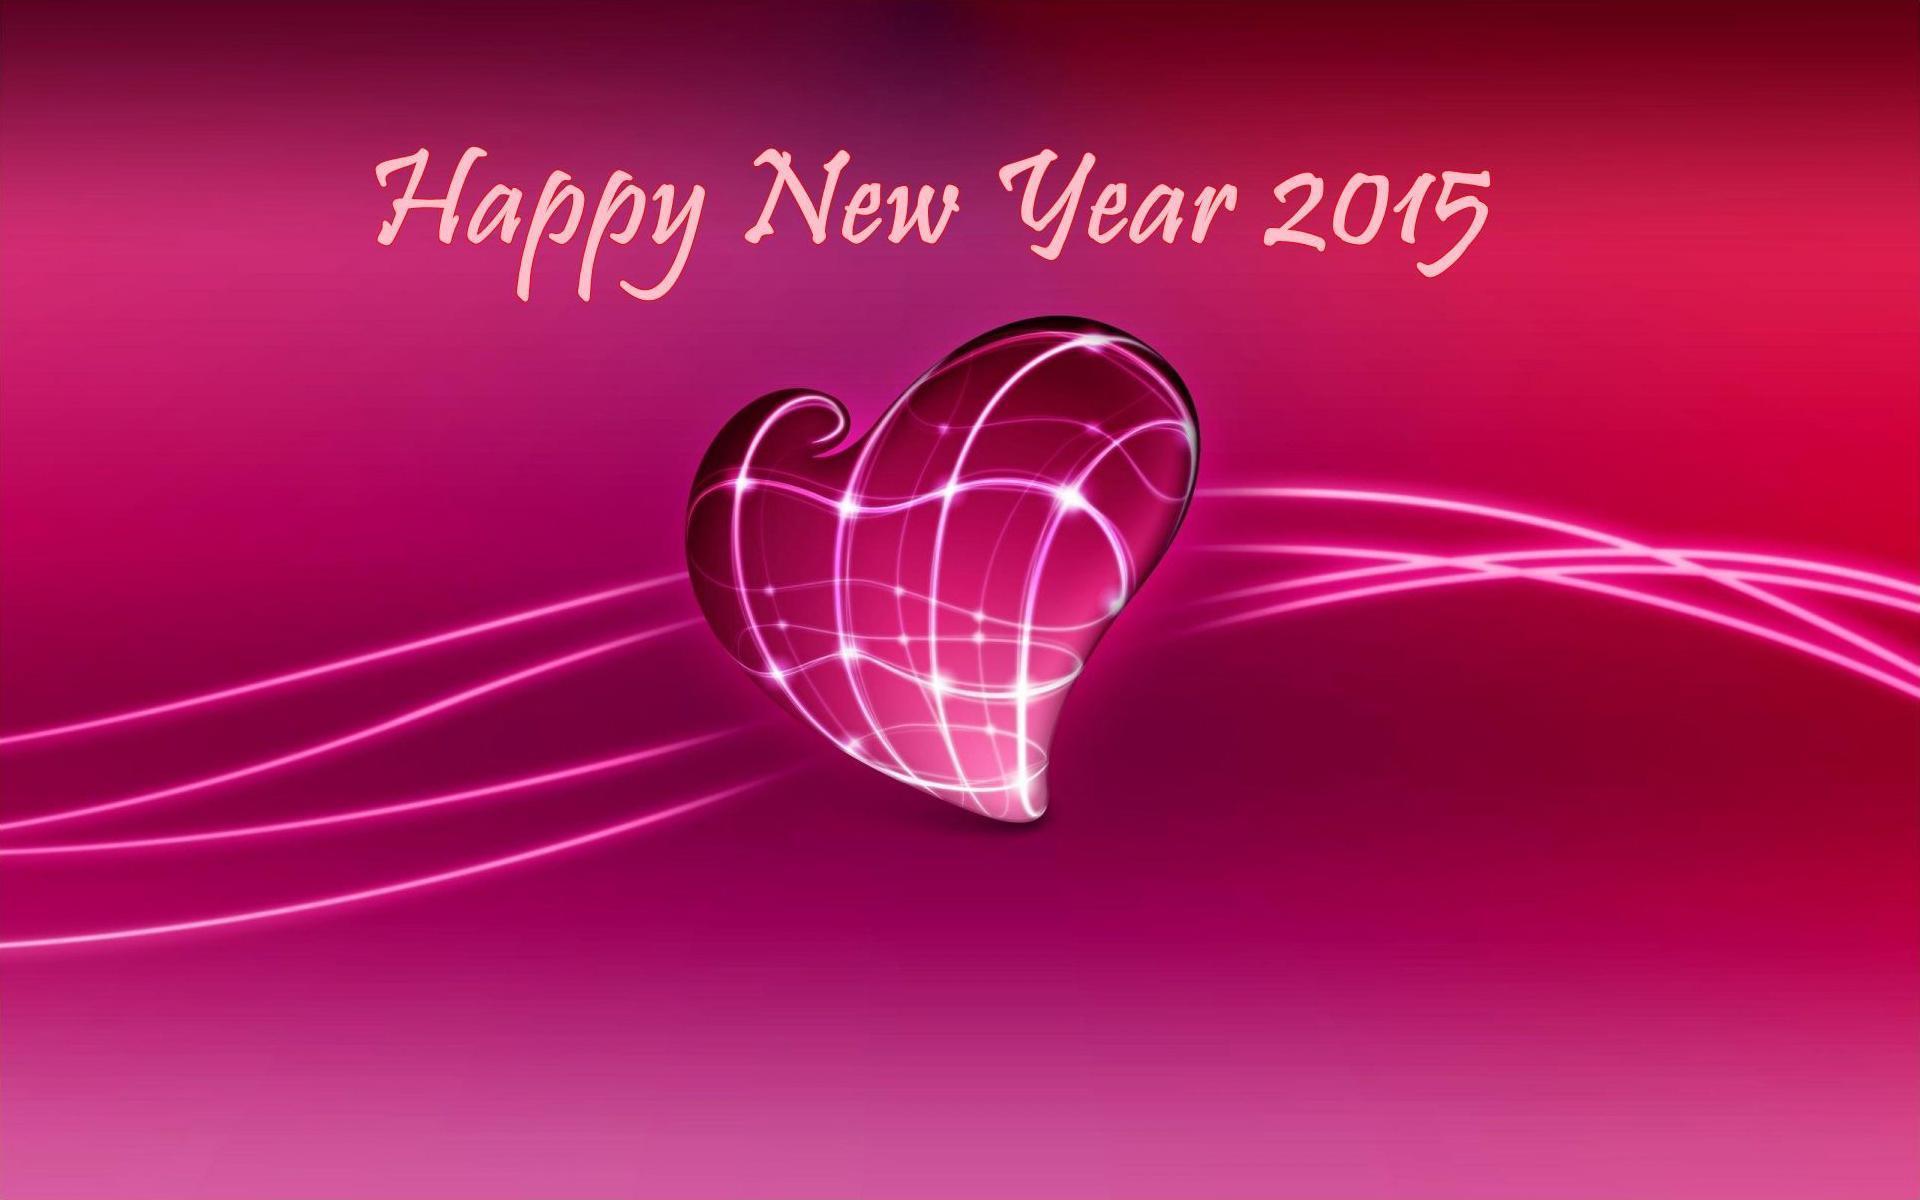 Happy New Year 2015 Wallpaper, Quotes, Wishes, SMS, Poems, Image